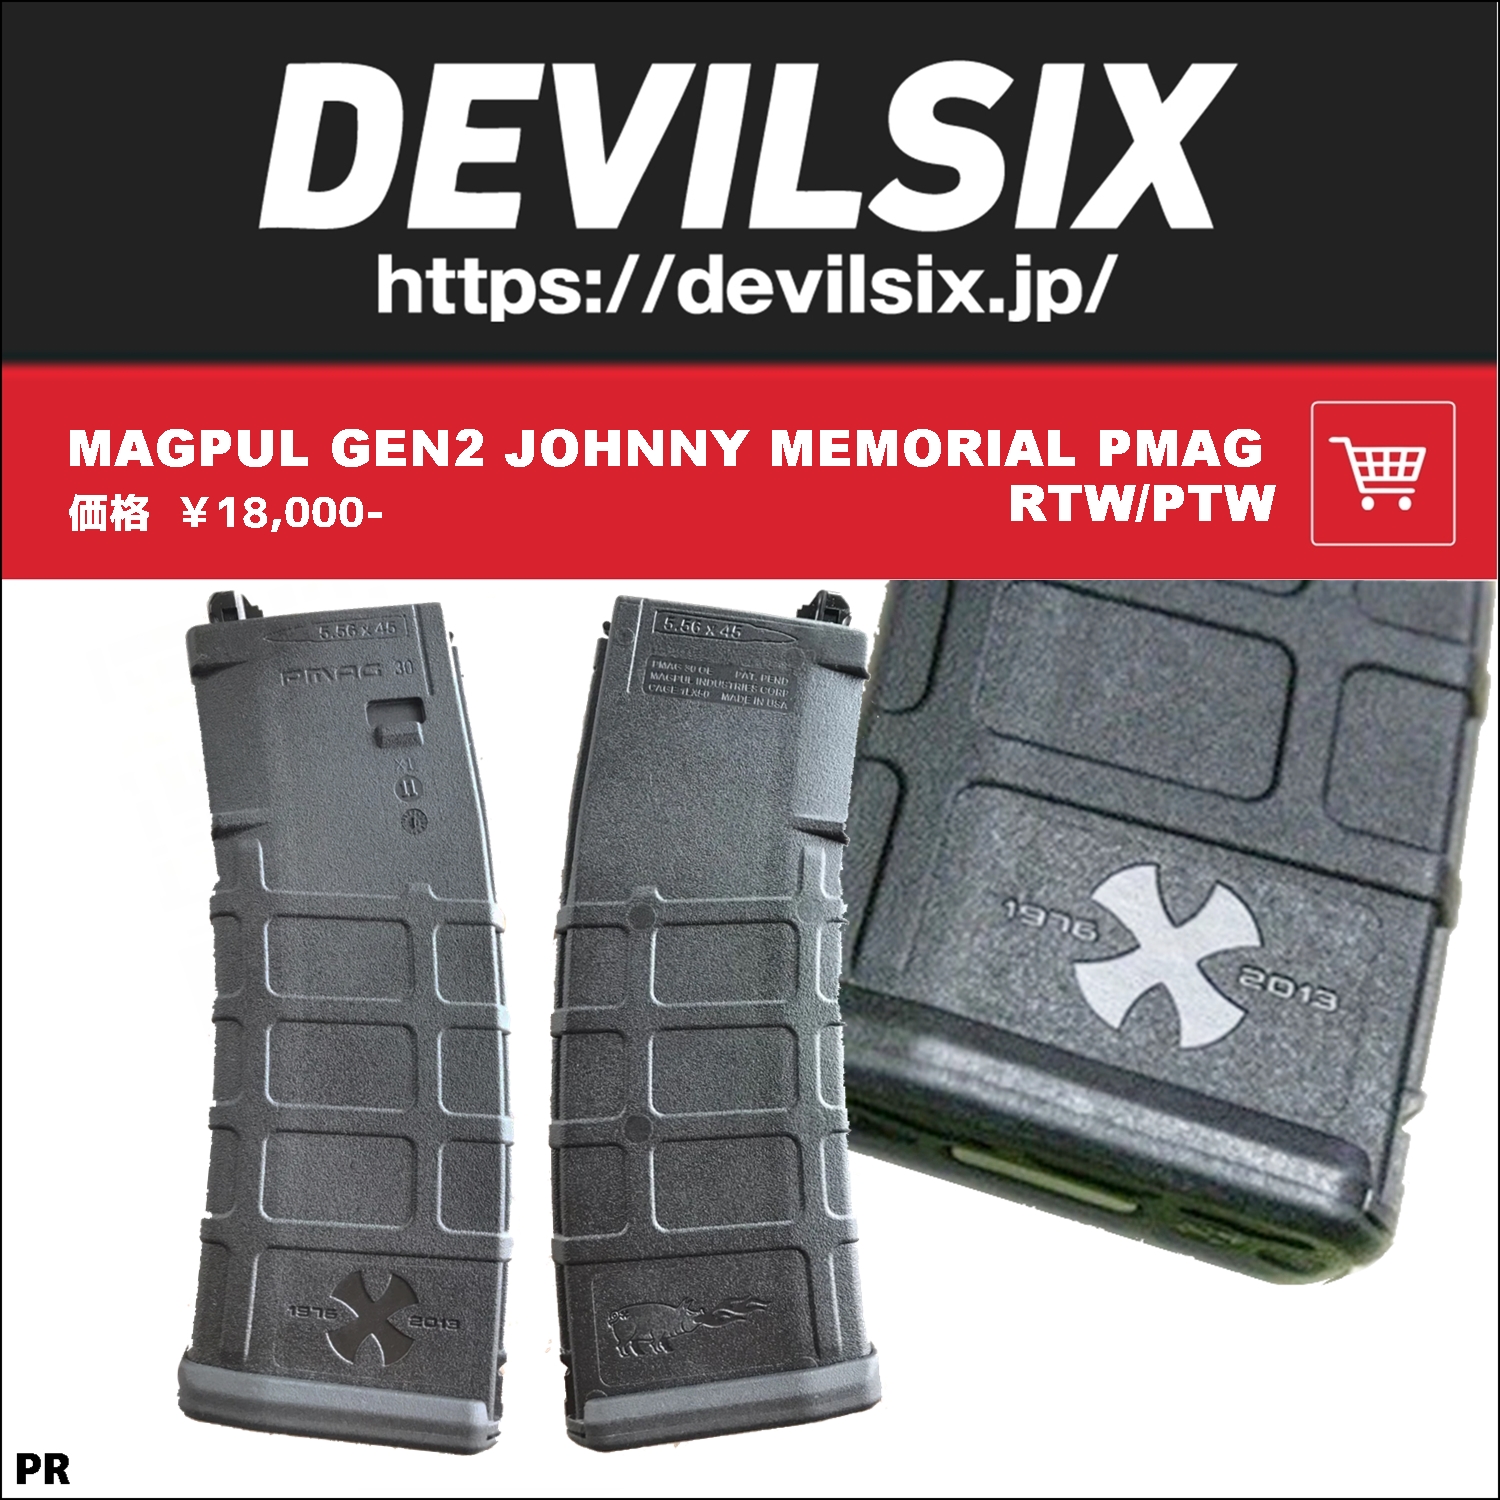 ACE 1 ARMS PMAG FOR MWS GBB DEVILSIX!!